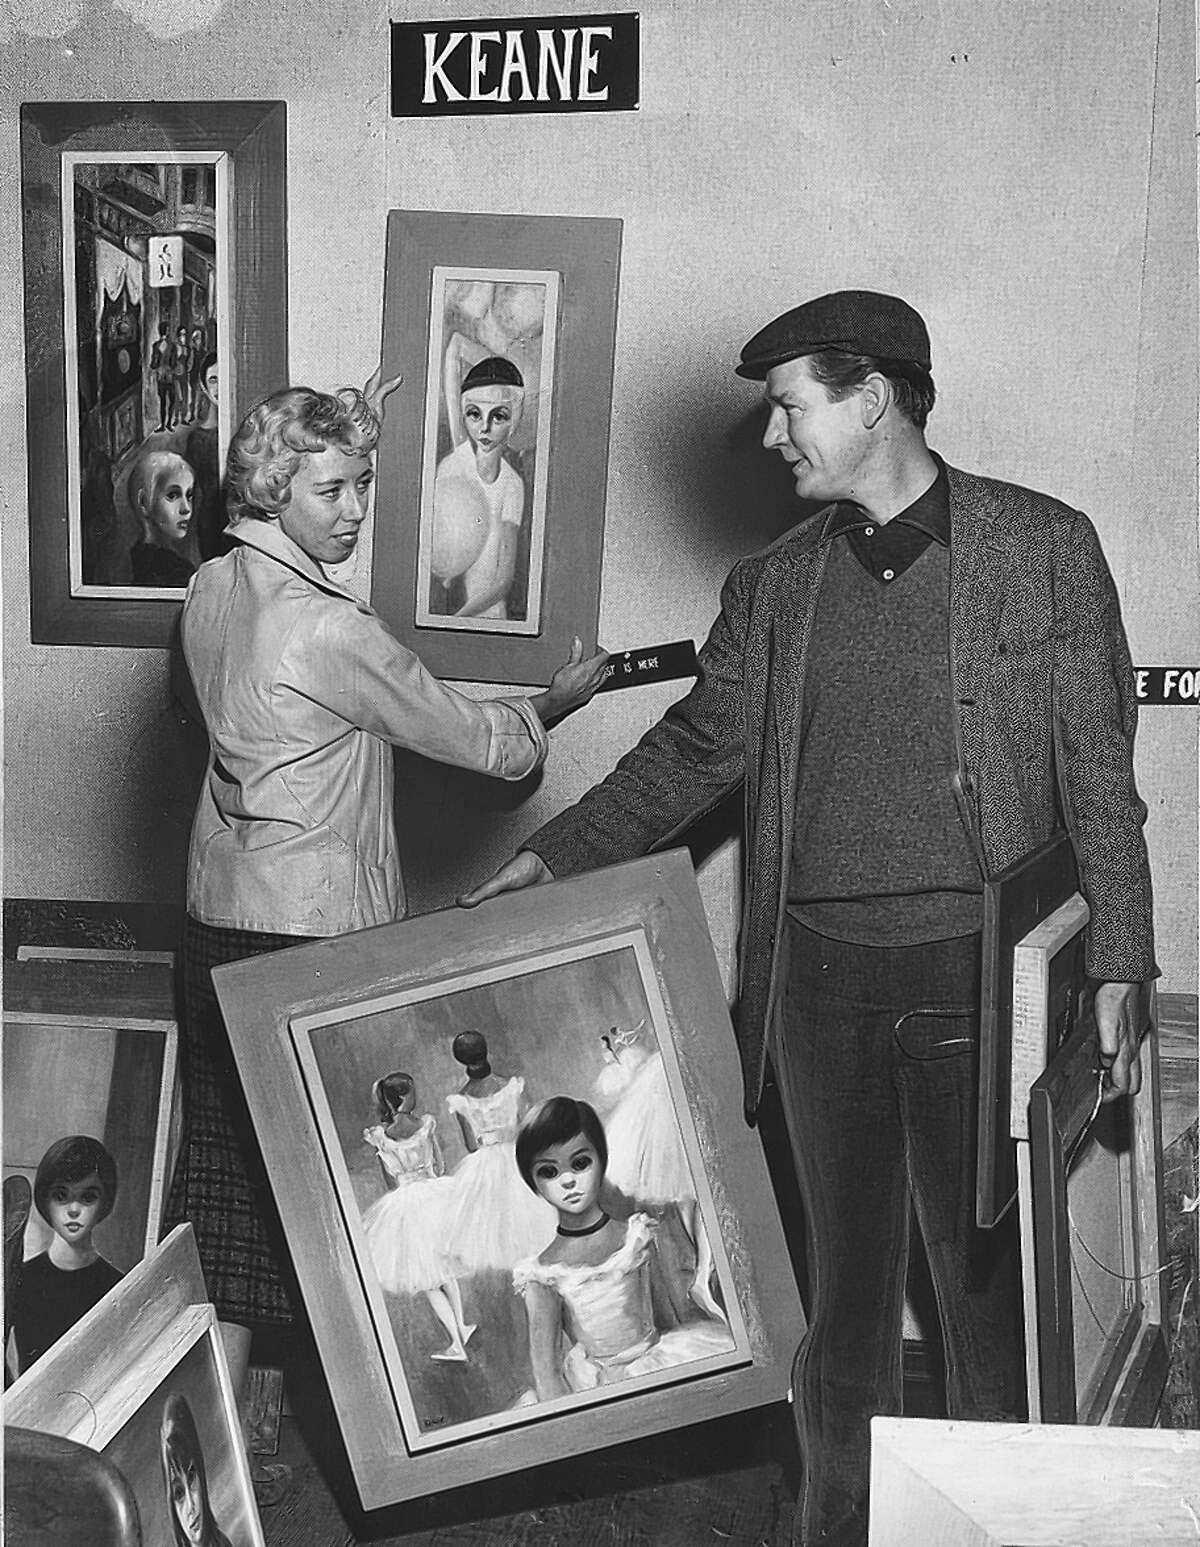 Keane’s then-husband, Walter Keane, shot to stardom by taking credit for her work. “He could charm anybody,” she says.